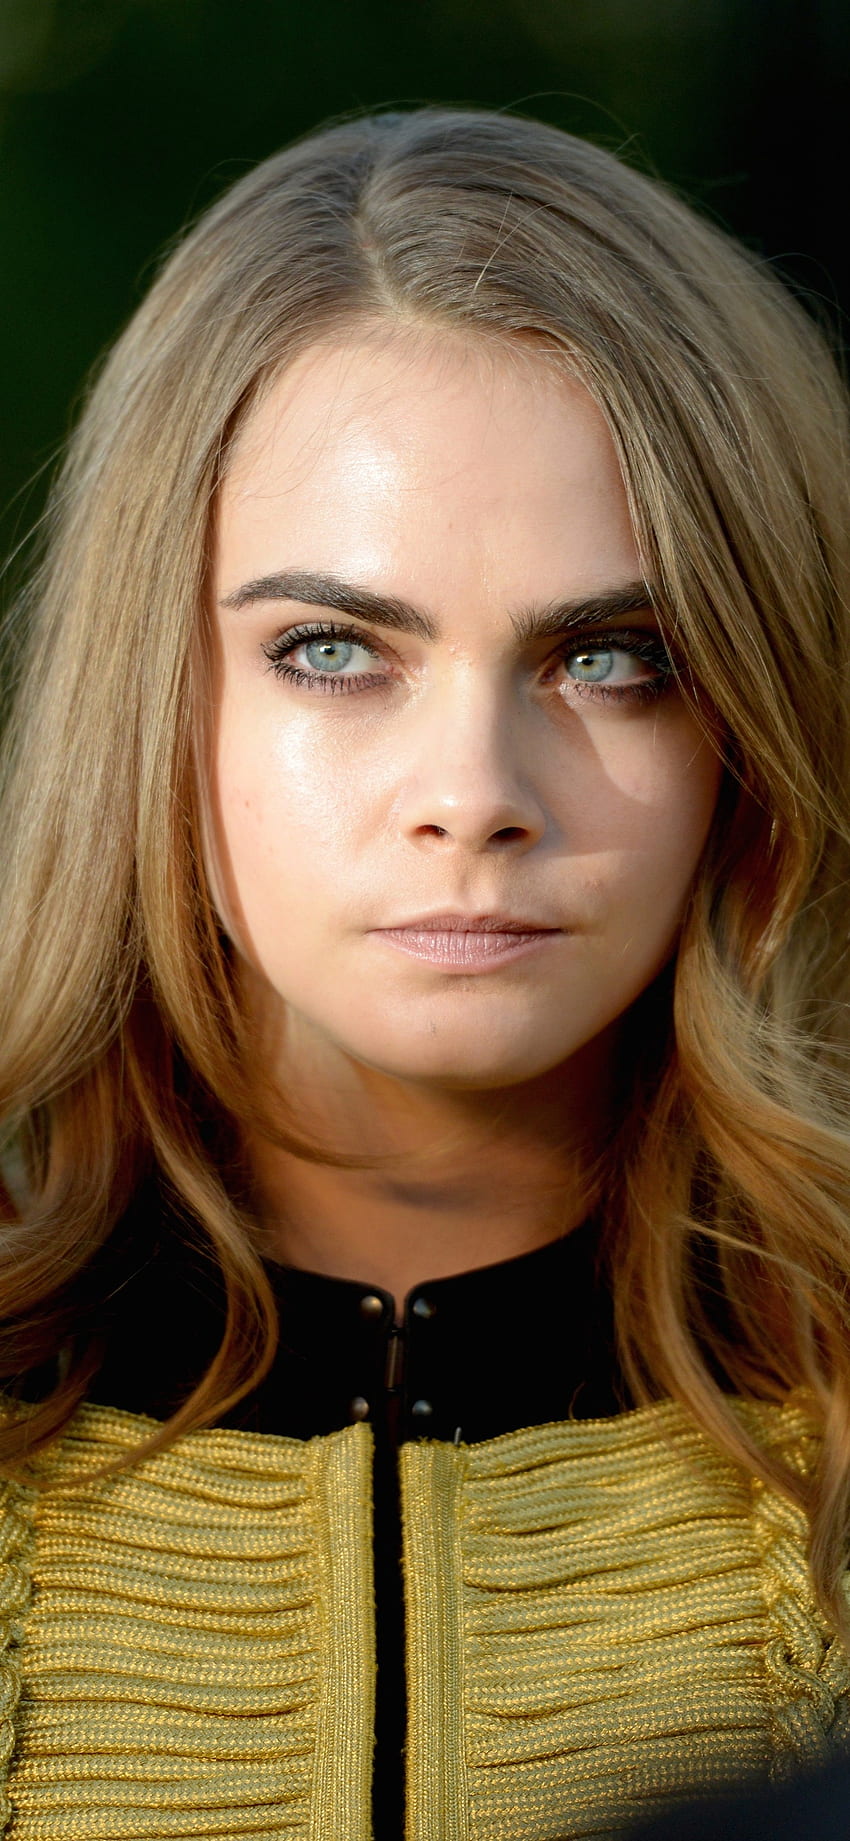 Latest Cara Delevingne iPhone XS, iPhone 10, iPhone X , , Background, and, London Fashion Show iPhone HD phone wallpaper